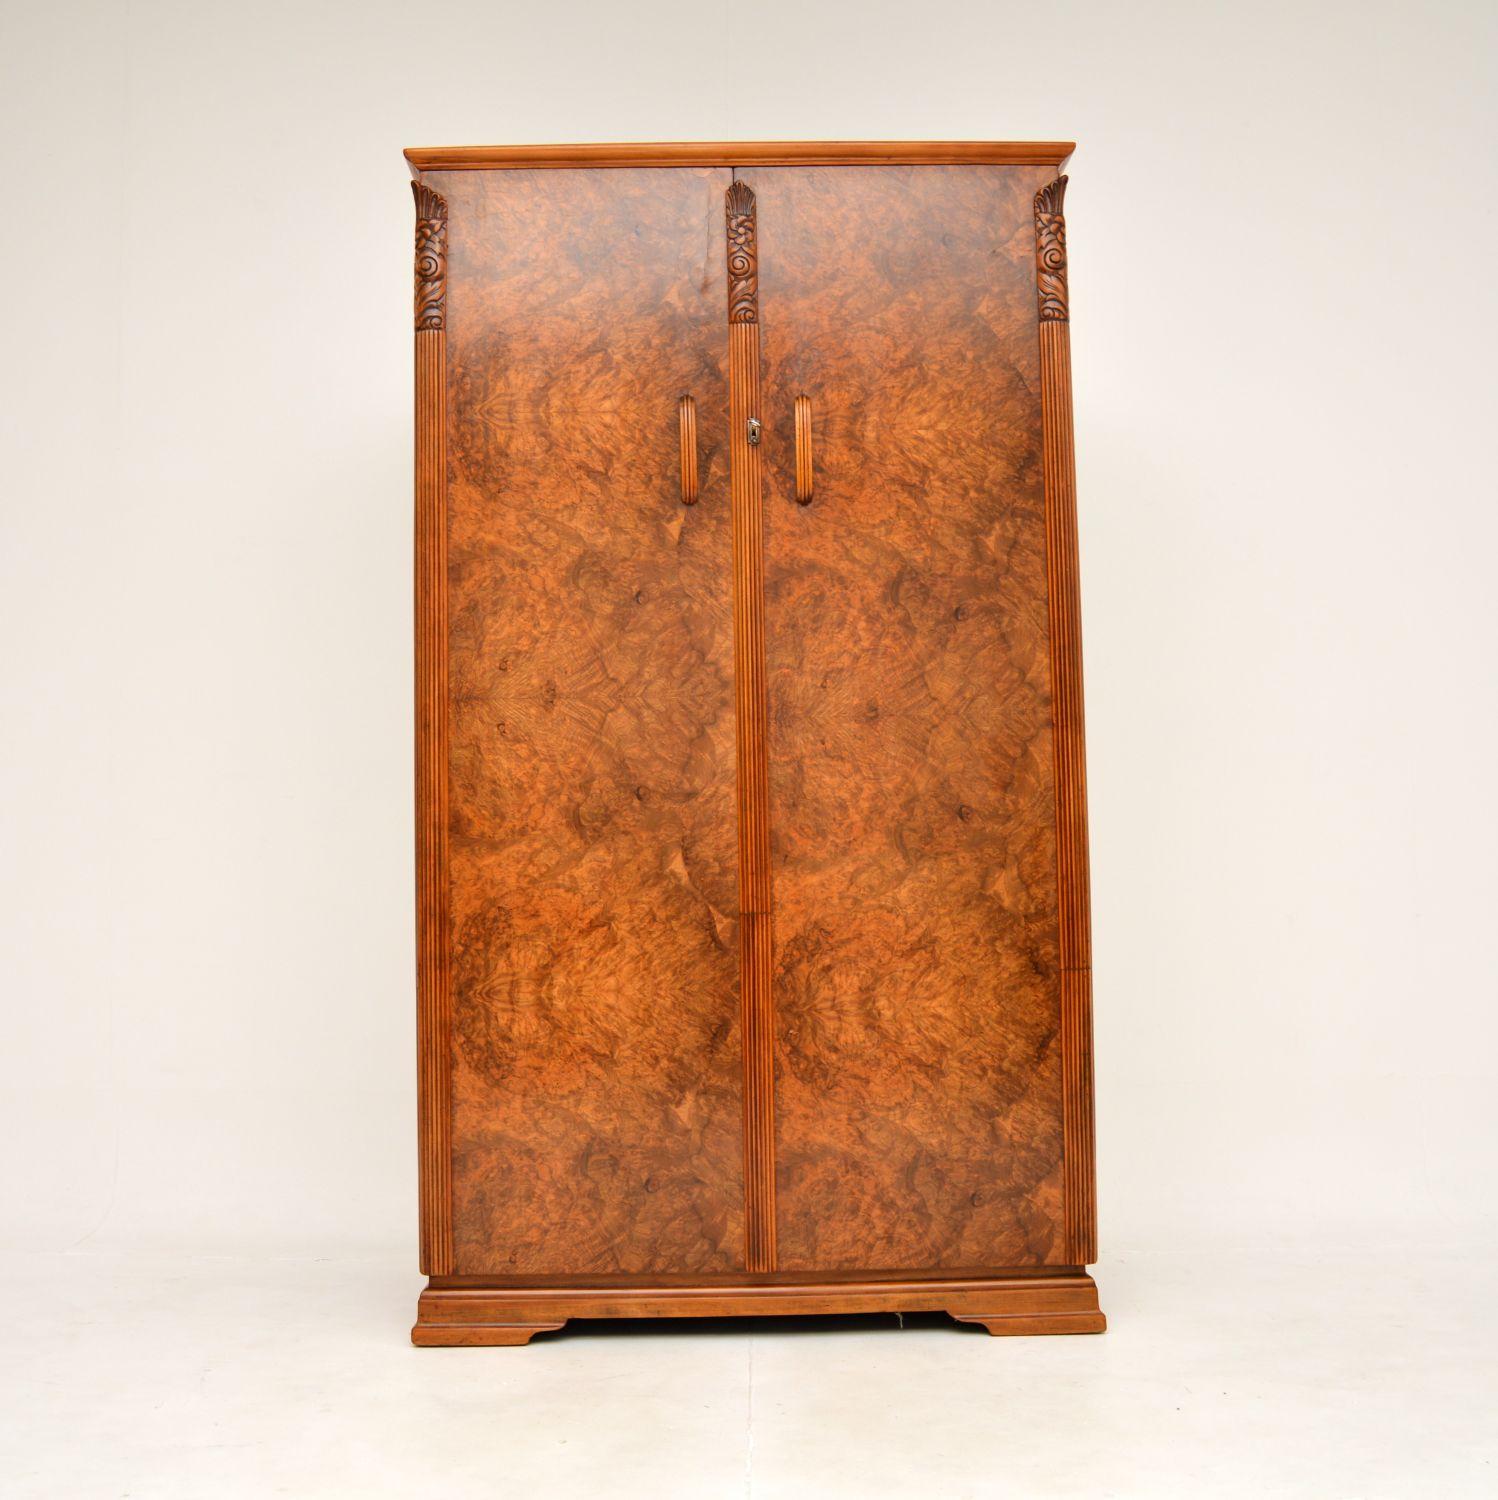 An absolutely stunning Art Deco burr walnut compactum wardrobe. This was made in England, it dates from the 1920’s.

It is of amazing quality and is a very useful size, it is not too imposing yet offers plenty of storage space. The burr walnut grain